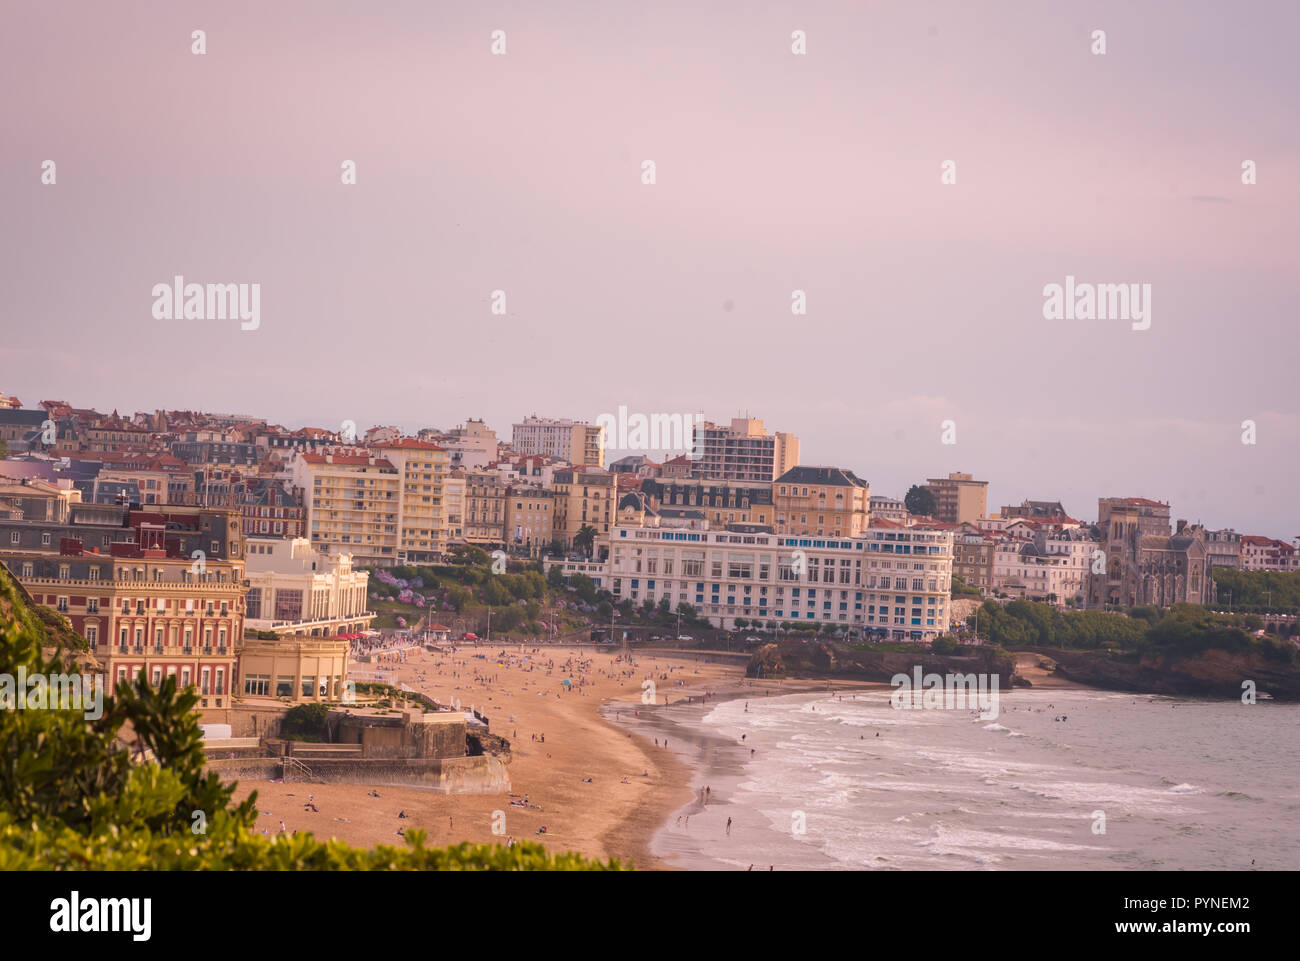 july 07 2018 Biarritz , France . Biarritz city and its famous sand beaches - Miramar and La Grande Plage, Bay of Biscay, Atlantic coast, France Stock Photo